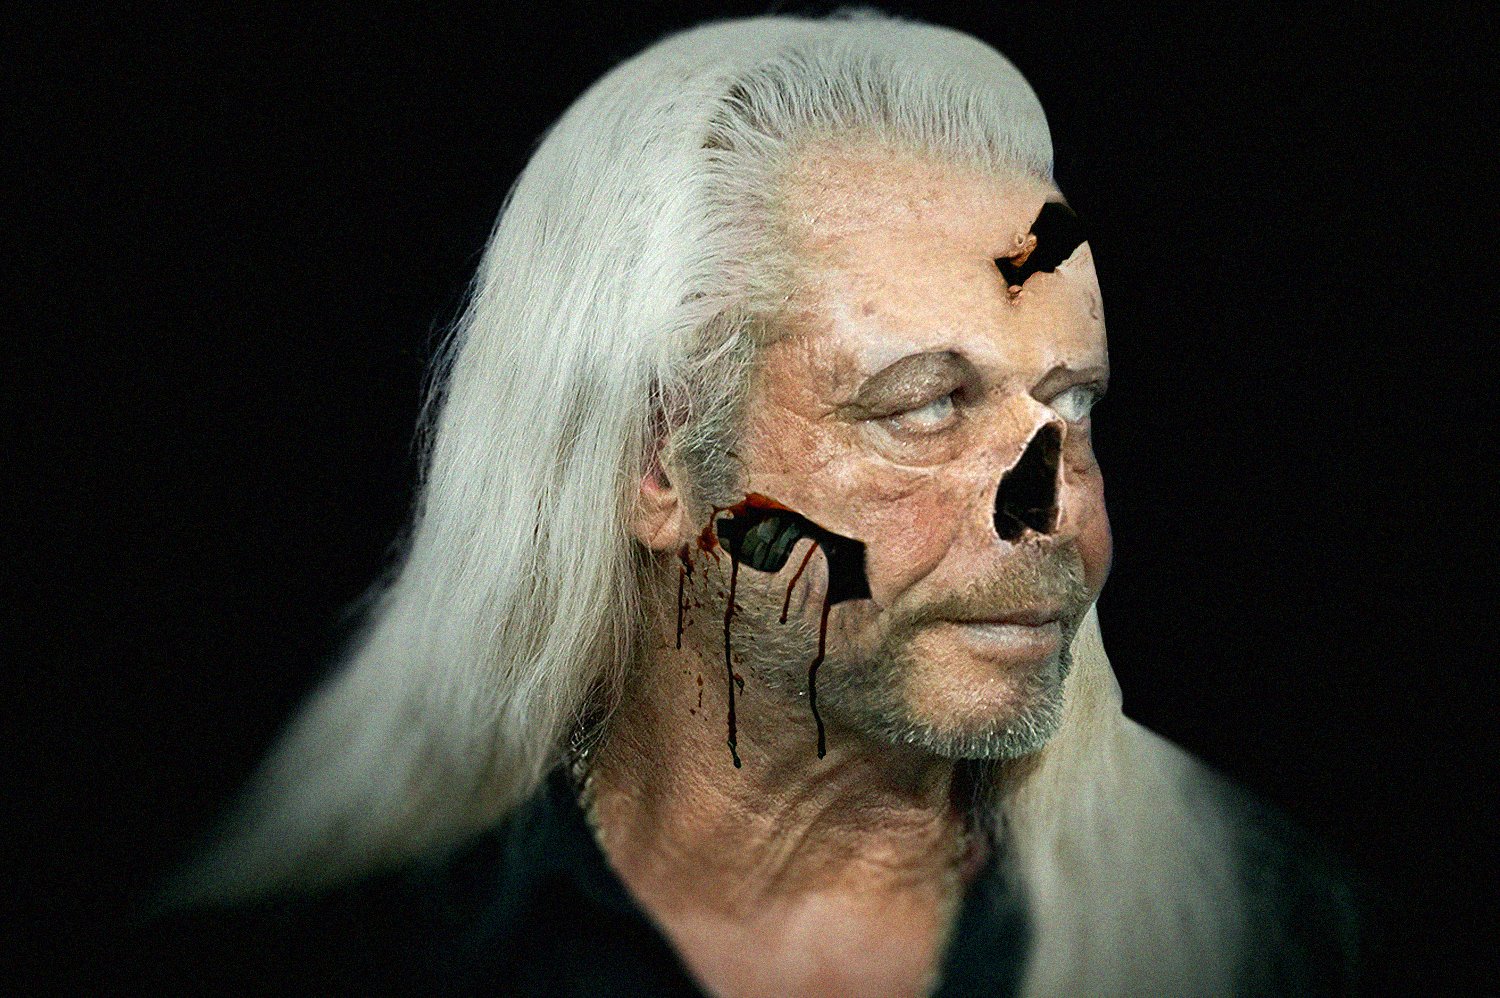 Duane "Dog" Chapman as a zombie | Source: Getty Images